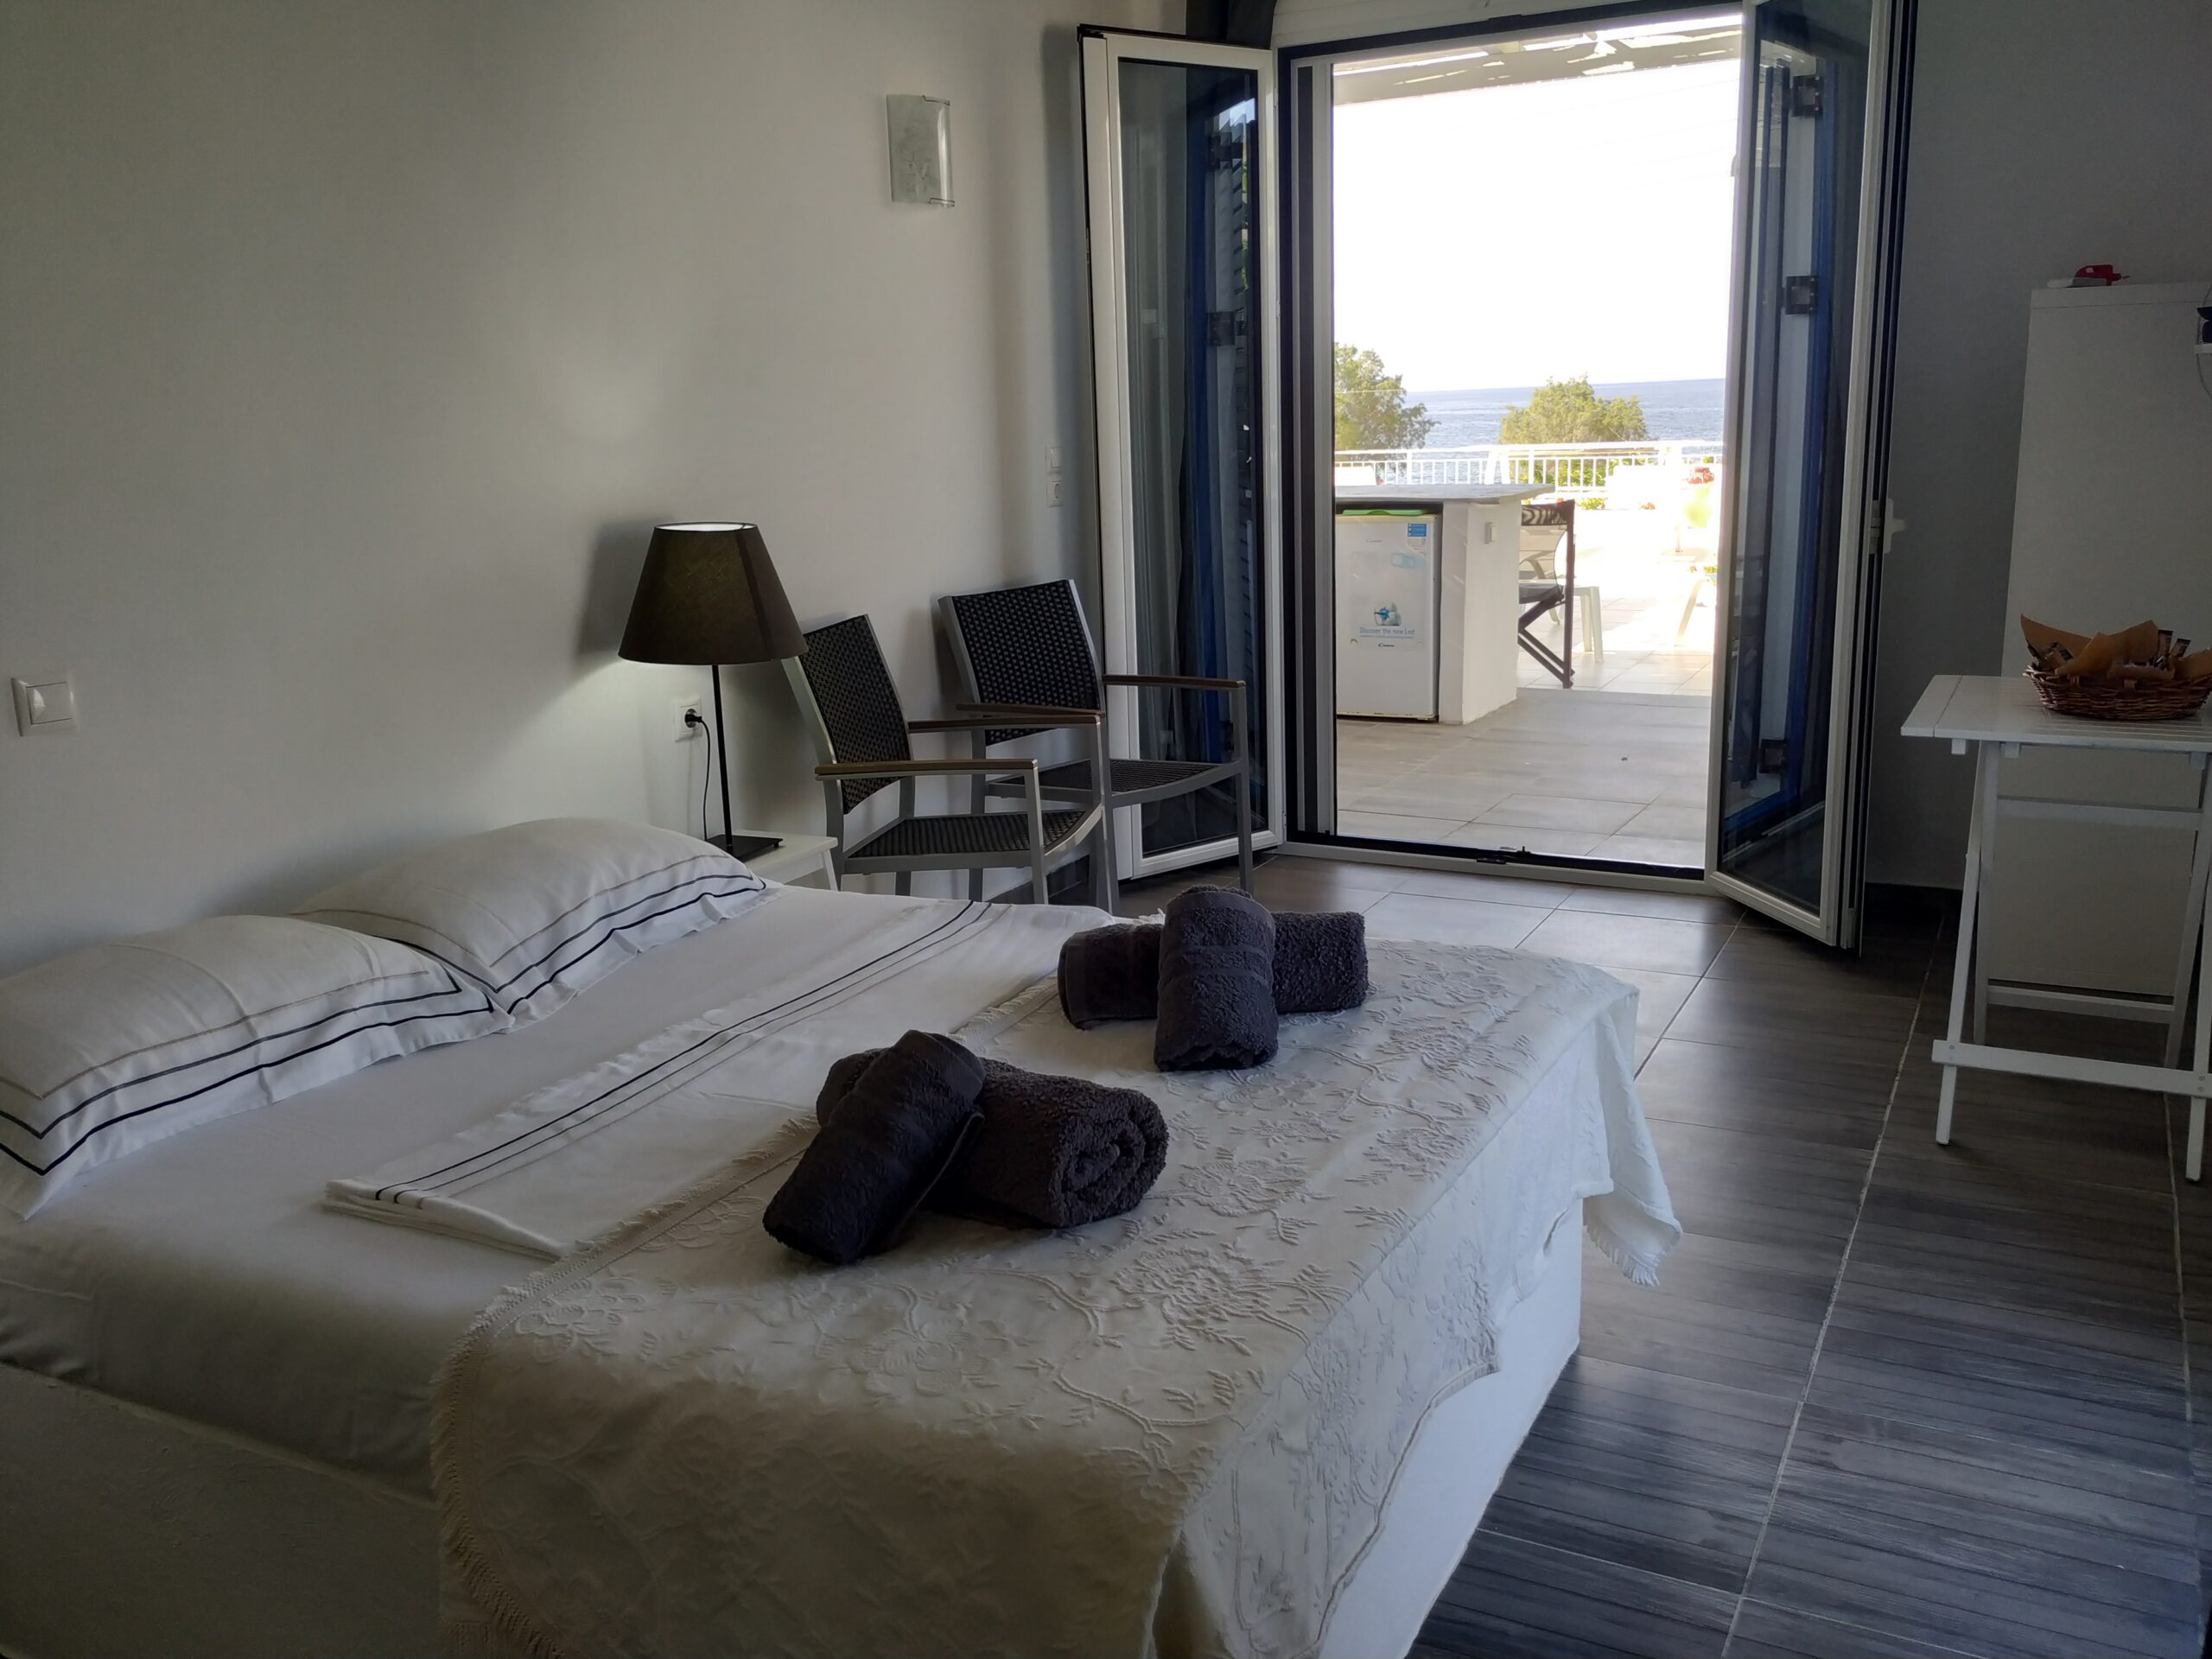 Room overlooking the sea and the island’s picturesque town